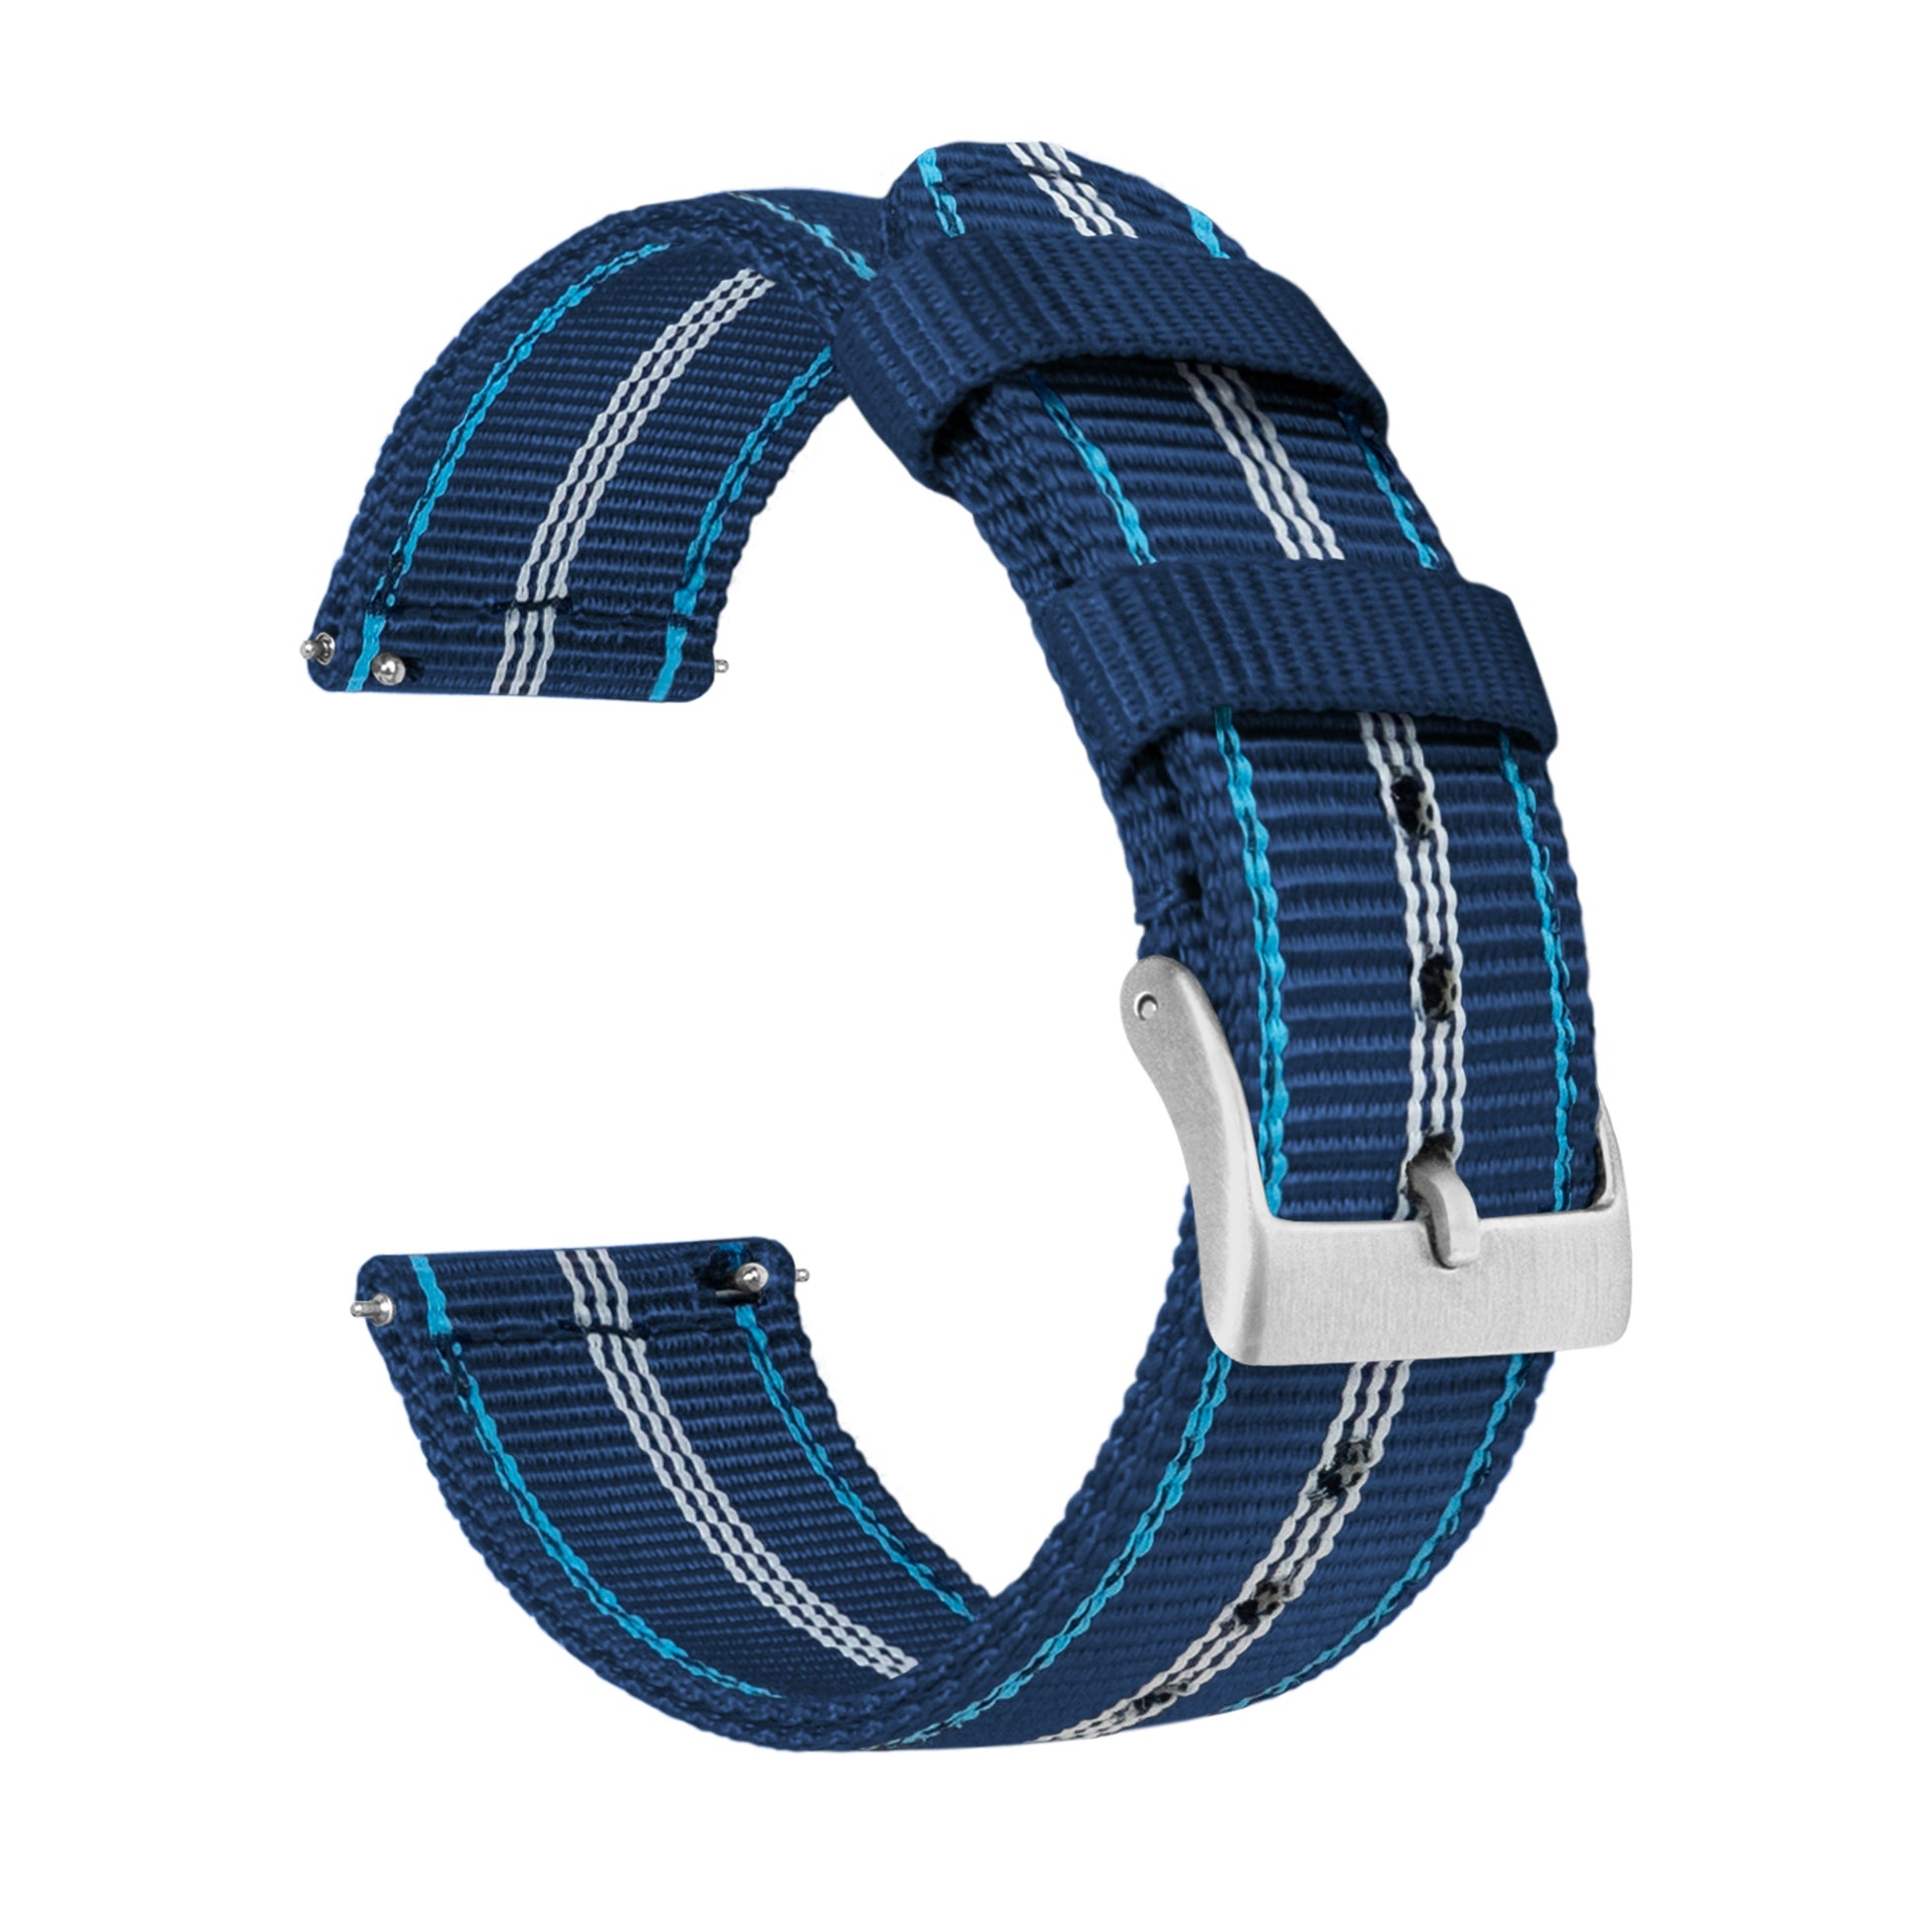 Fossil Q | Two-Piece NATO Style | Navy & Aqua Blue - Barton Watch Bands